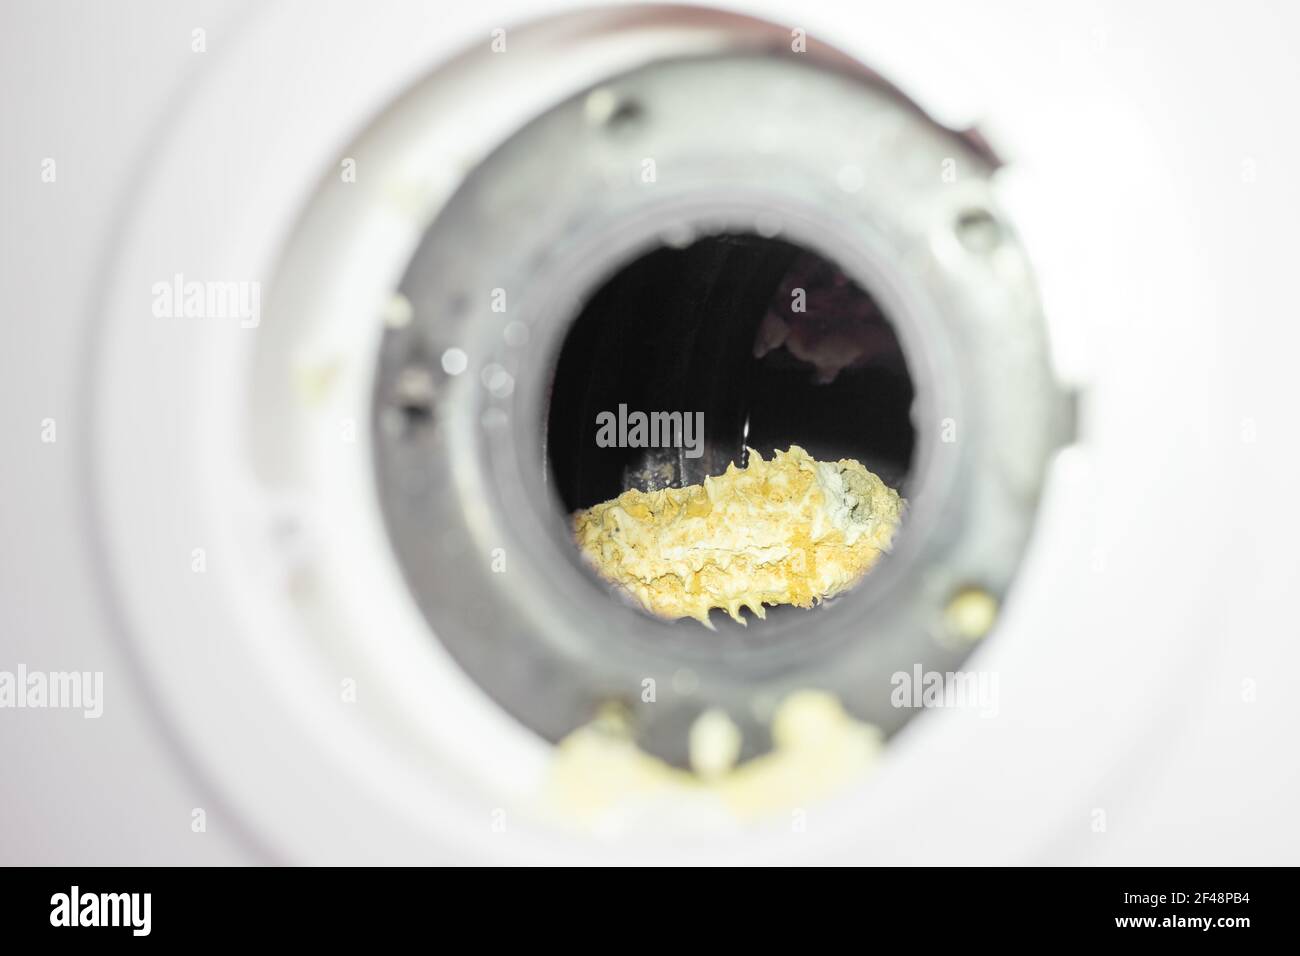 Yellow scale on the tubular electric heater of the boiler inside the tank. Dismantling and repair. Stock Photo